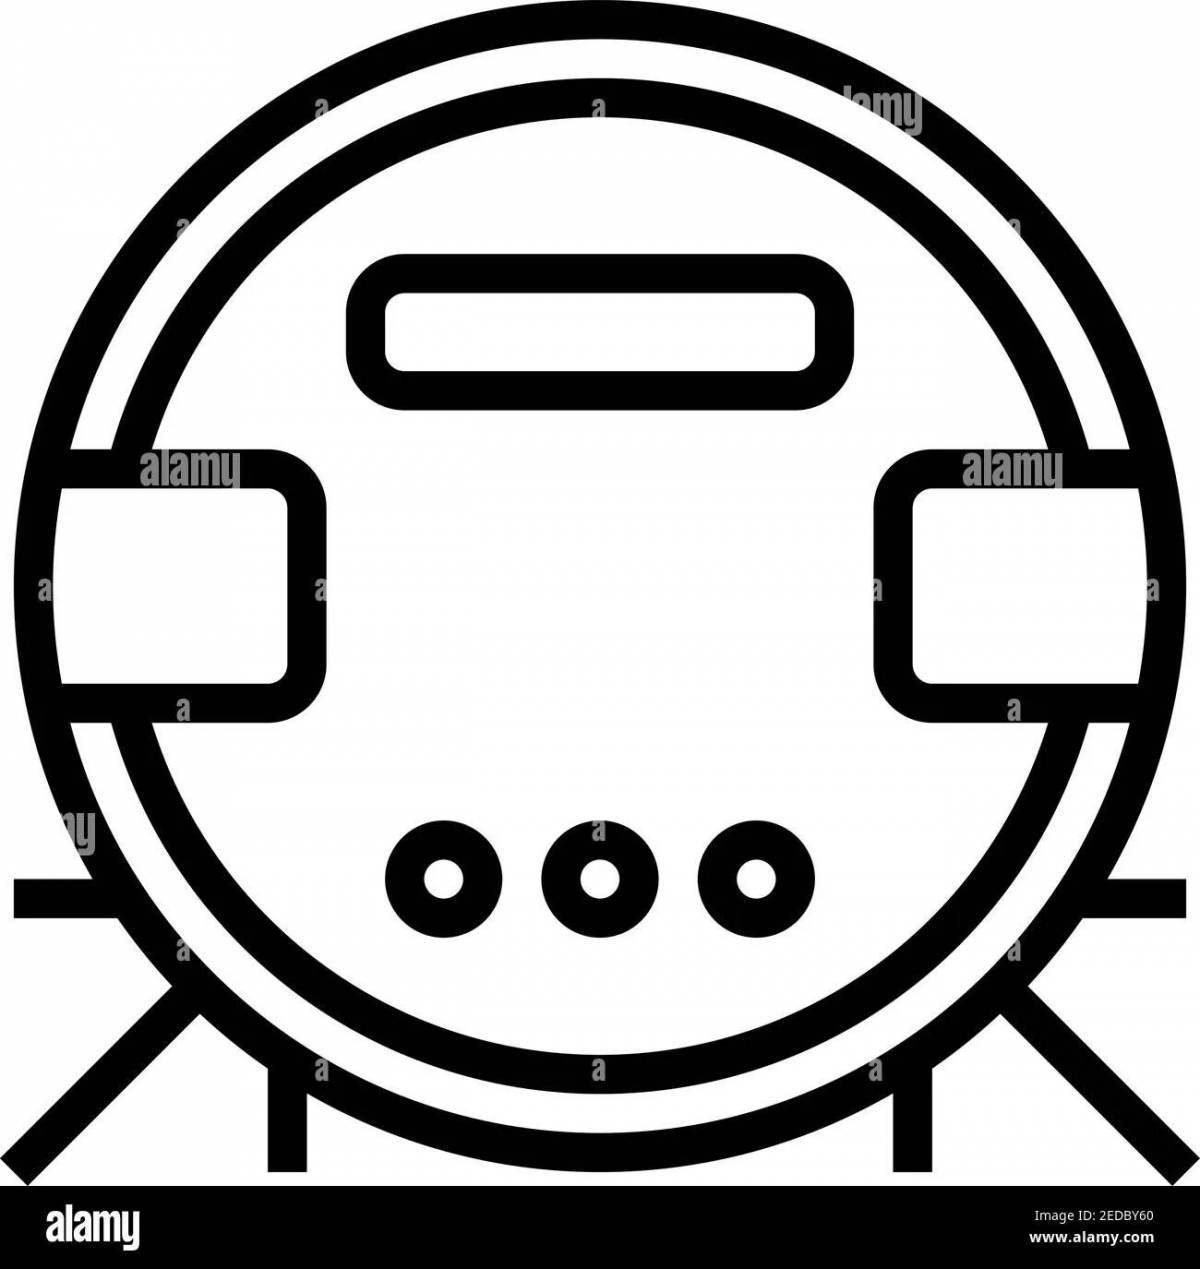 Fabulous Robot Vacuum Cleaner Coloring Page for Boys